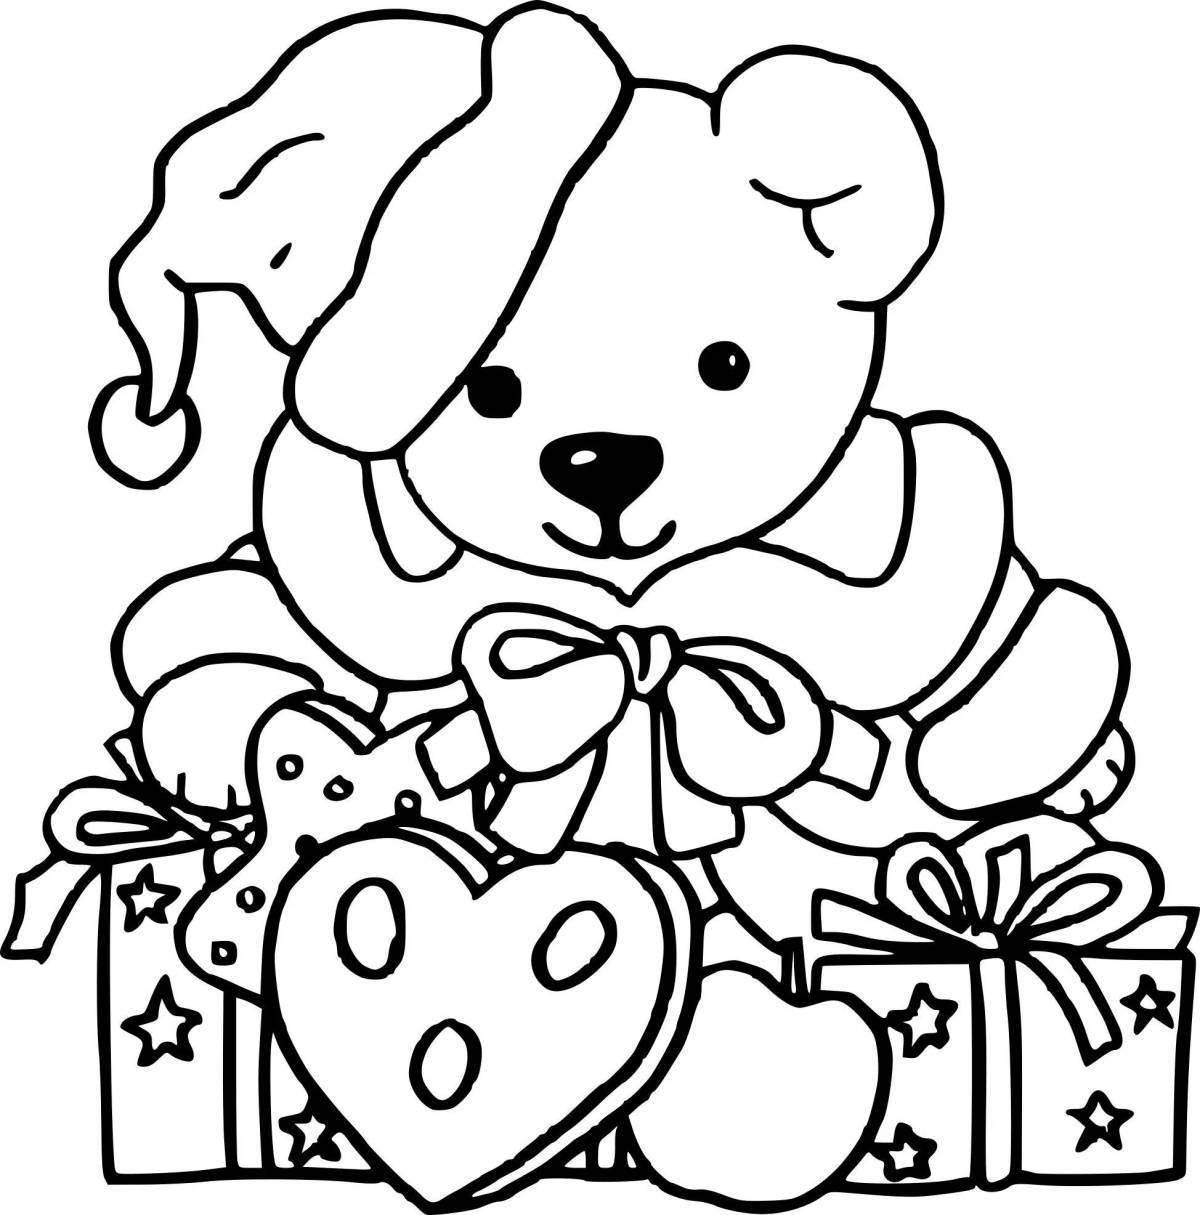 Coloring page luxury birthday present for mom